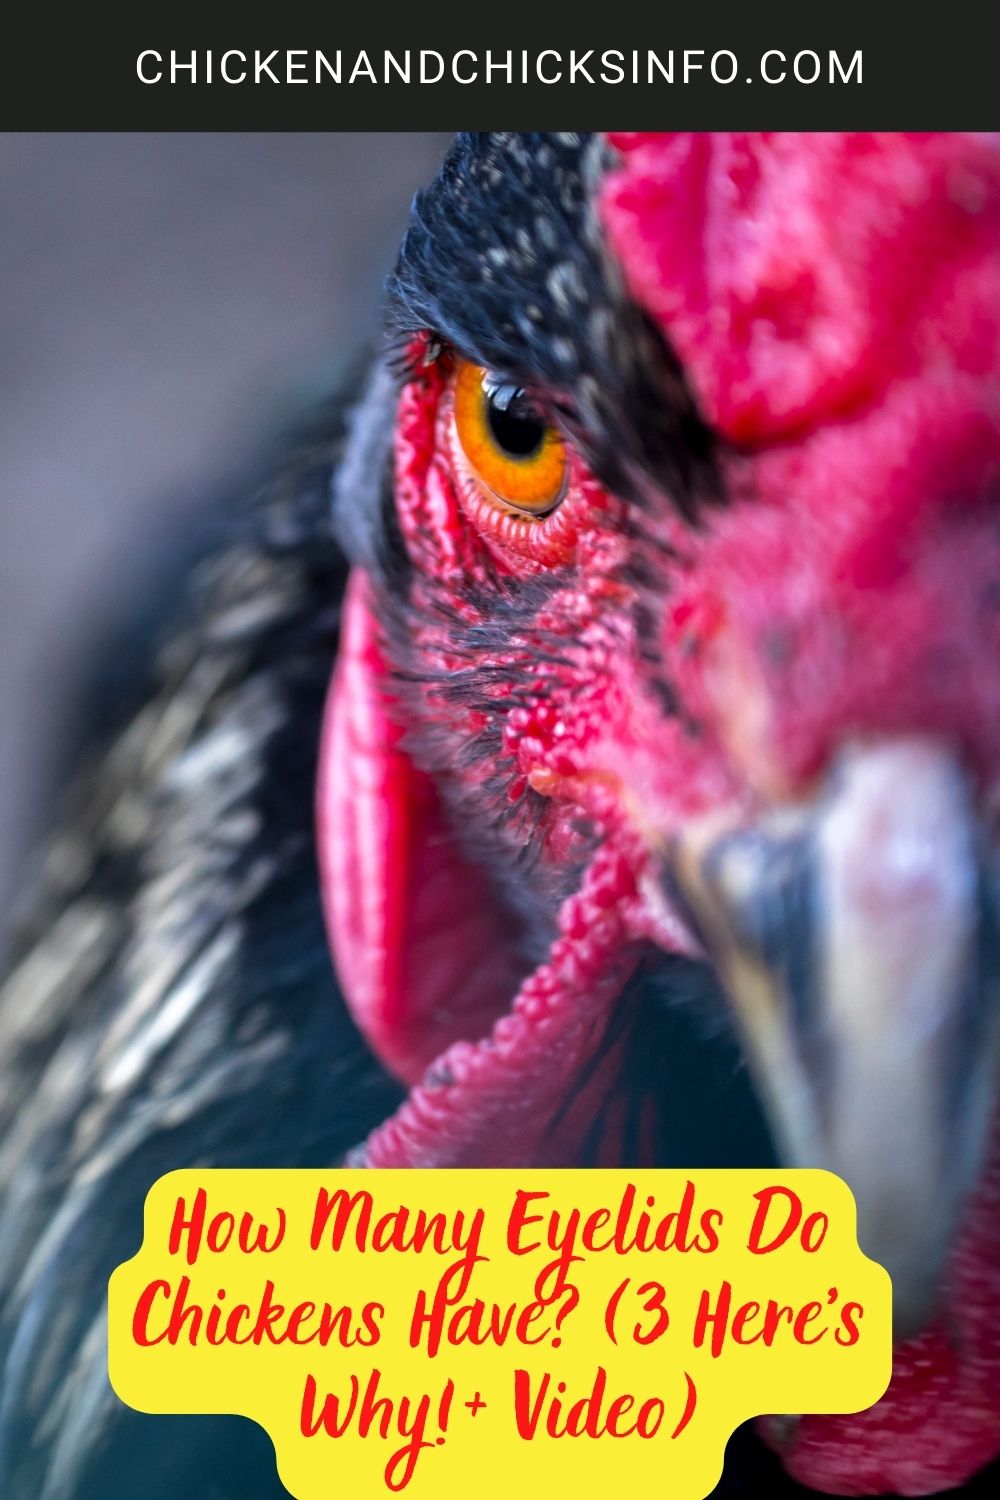 How Many Eyelids Do Chickens Have? (3 Here's Why!+ Video) poster.
